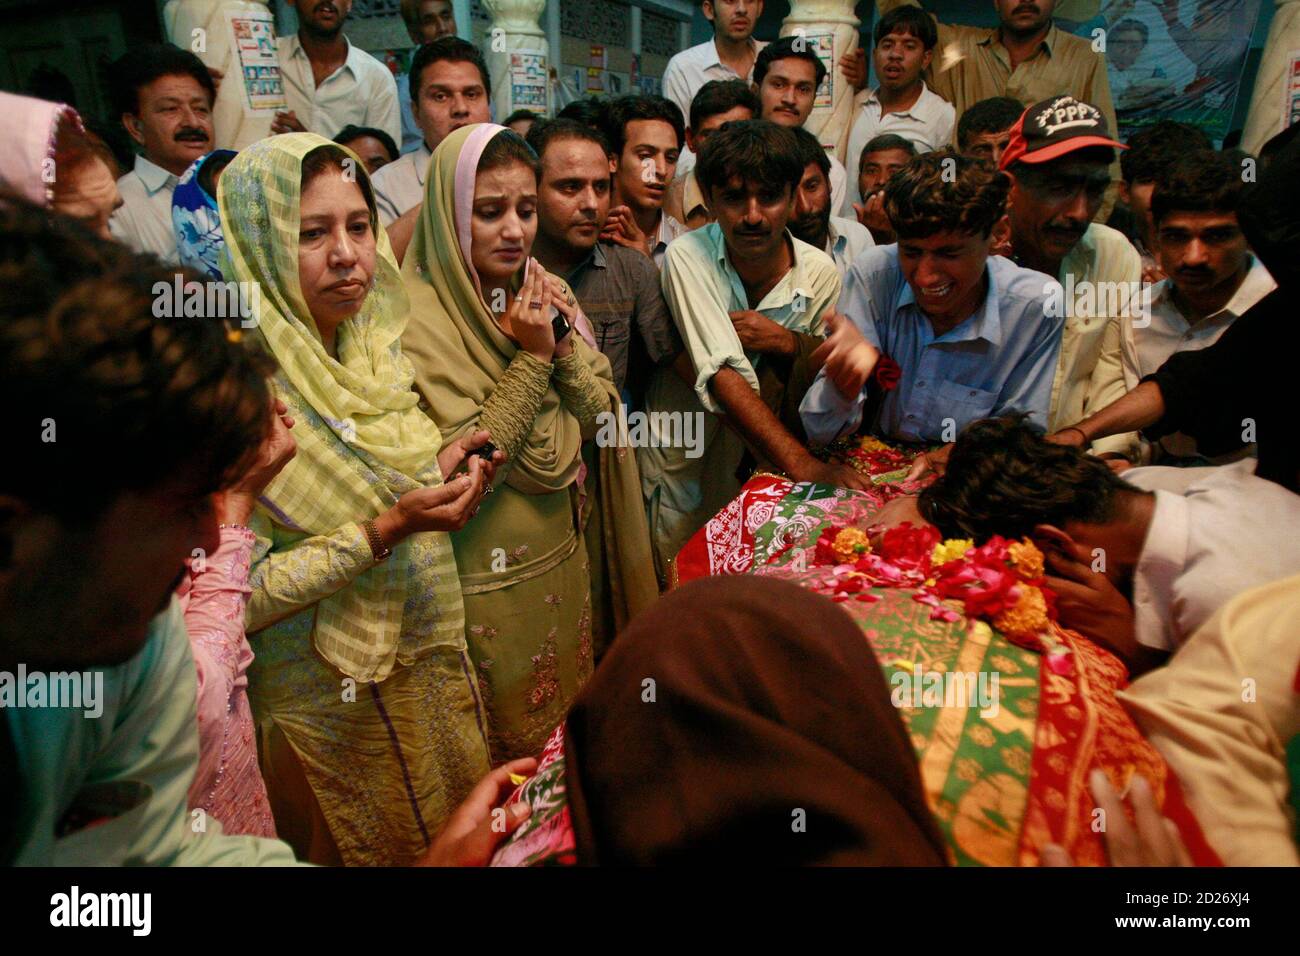 Supporters of Pakistan's slain former prime minister Zulfiqar Ali Bhutto pay their respects at his grave on his 30th death anniversary, at the family mausoleum in Garhi Khuda Bukash near Larkana April